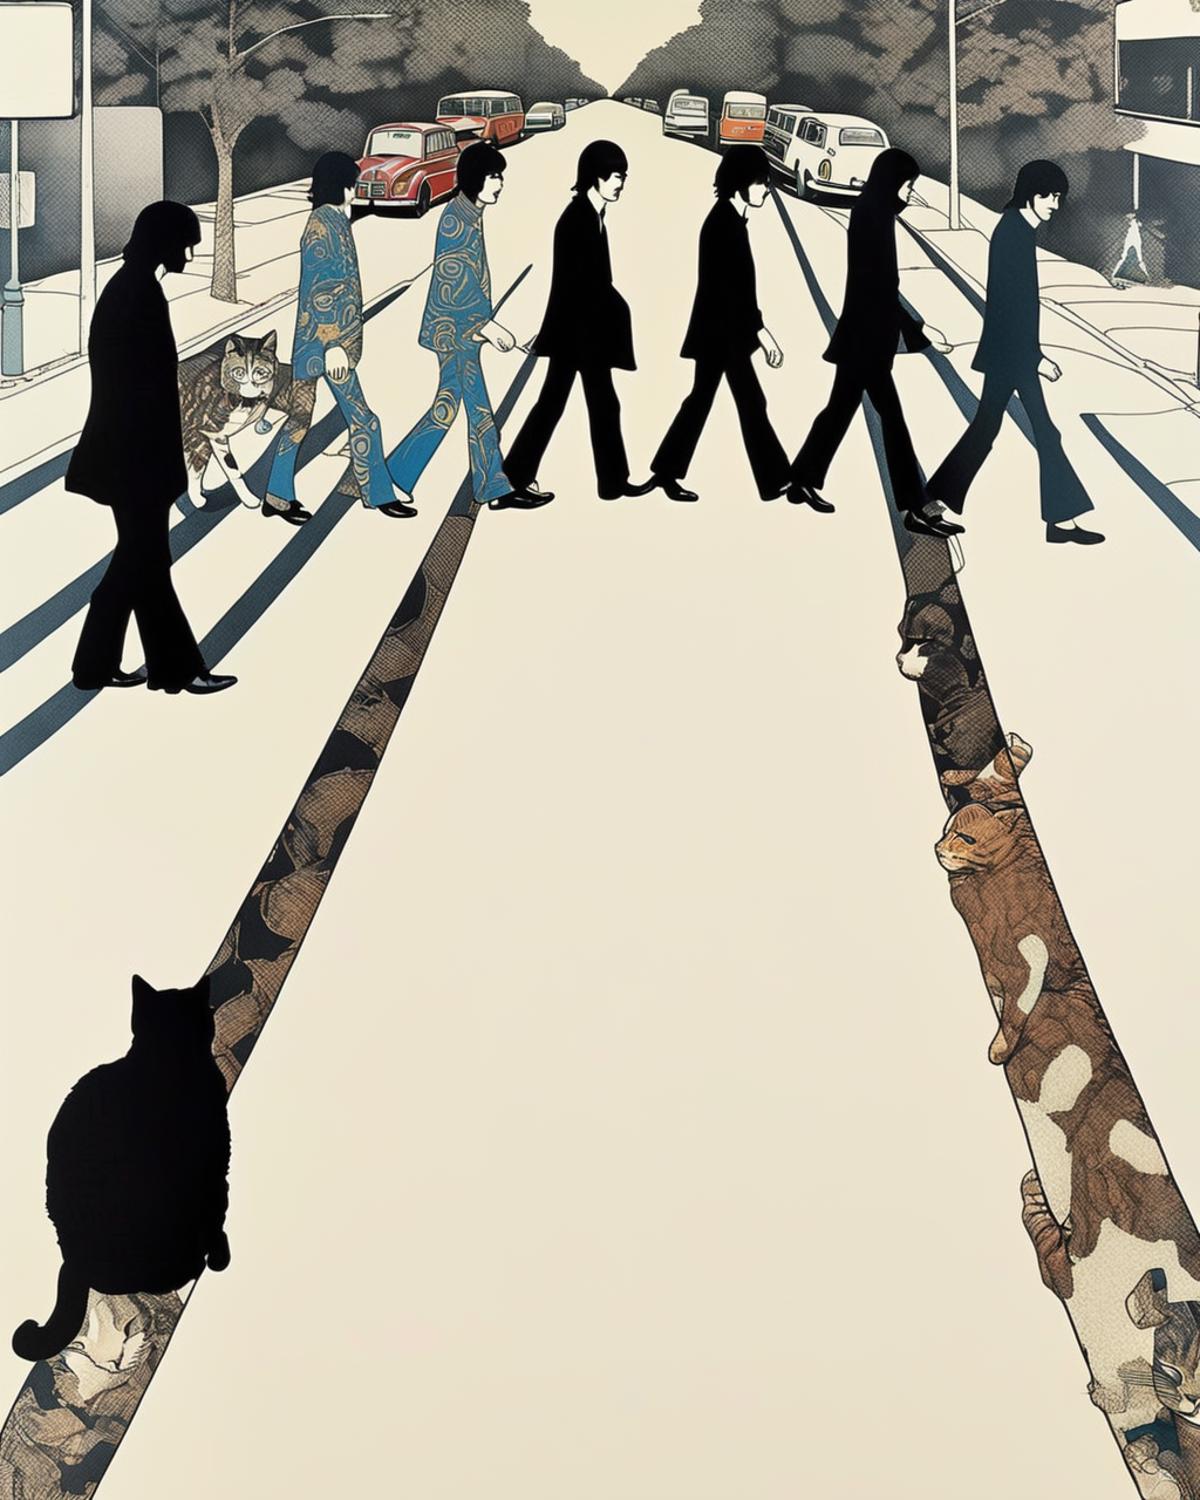 A cartoon of 5 people crossing the street and 2 cats underneath.